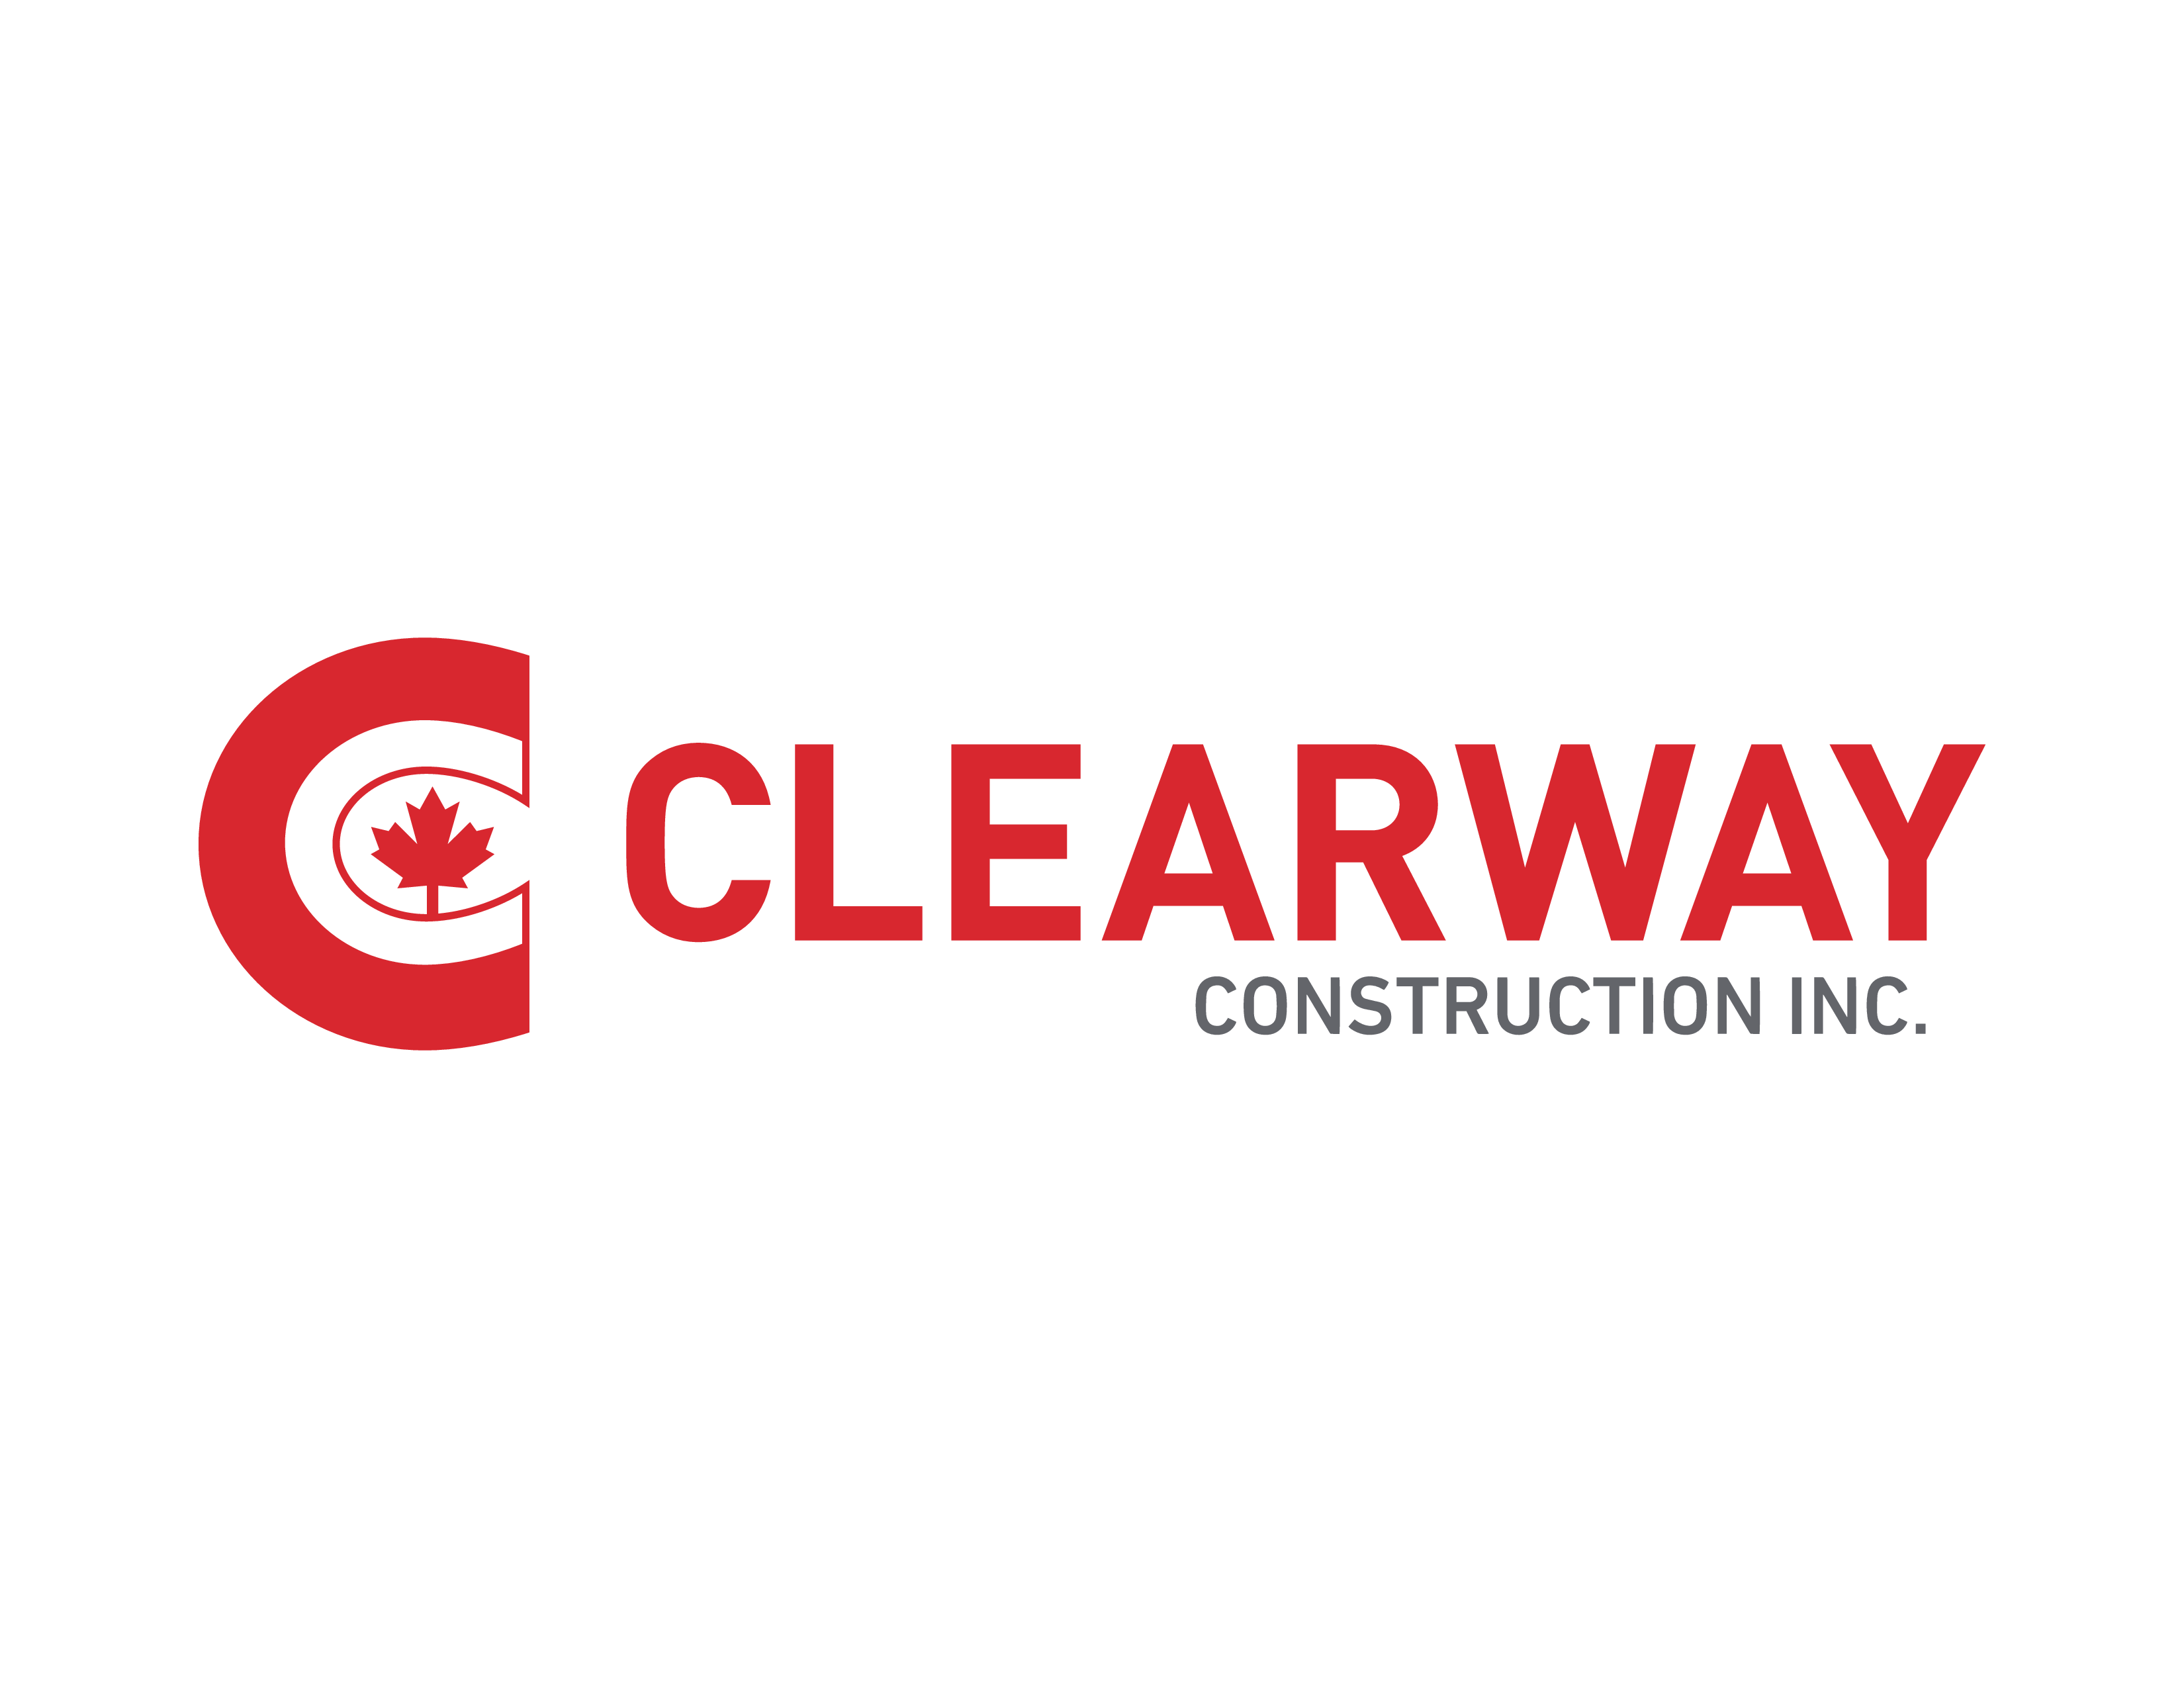 Clearway Construction